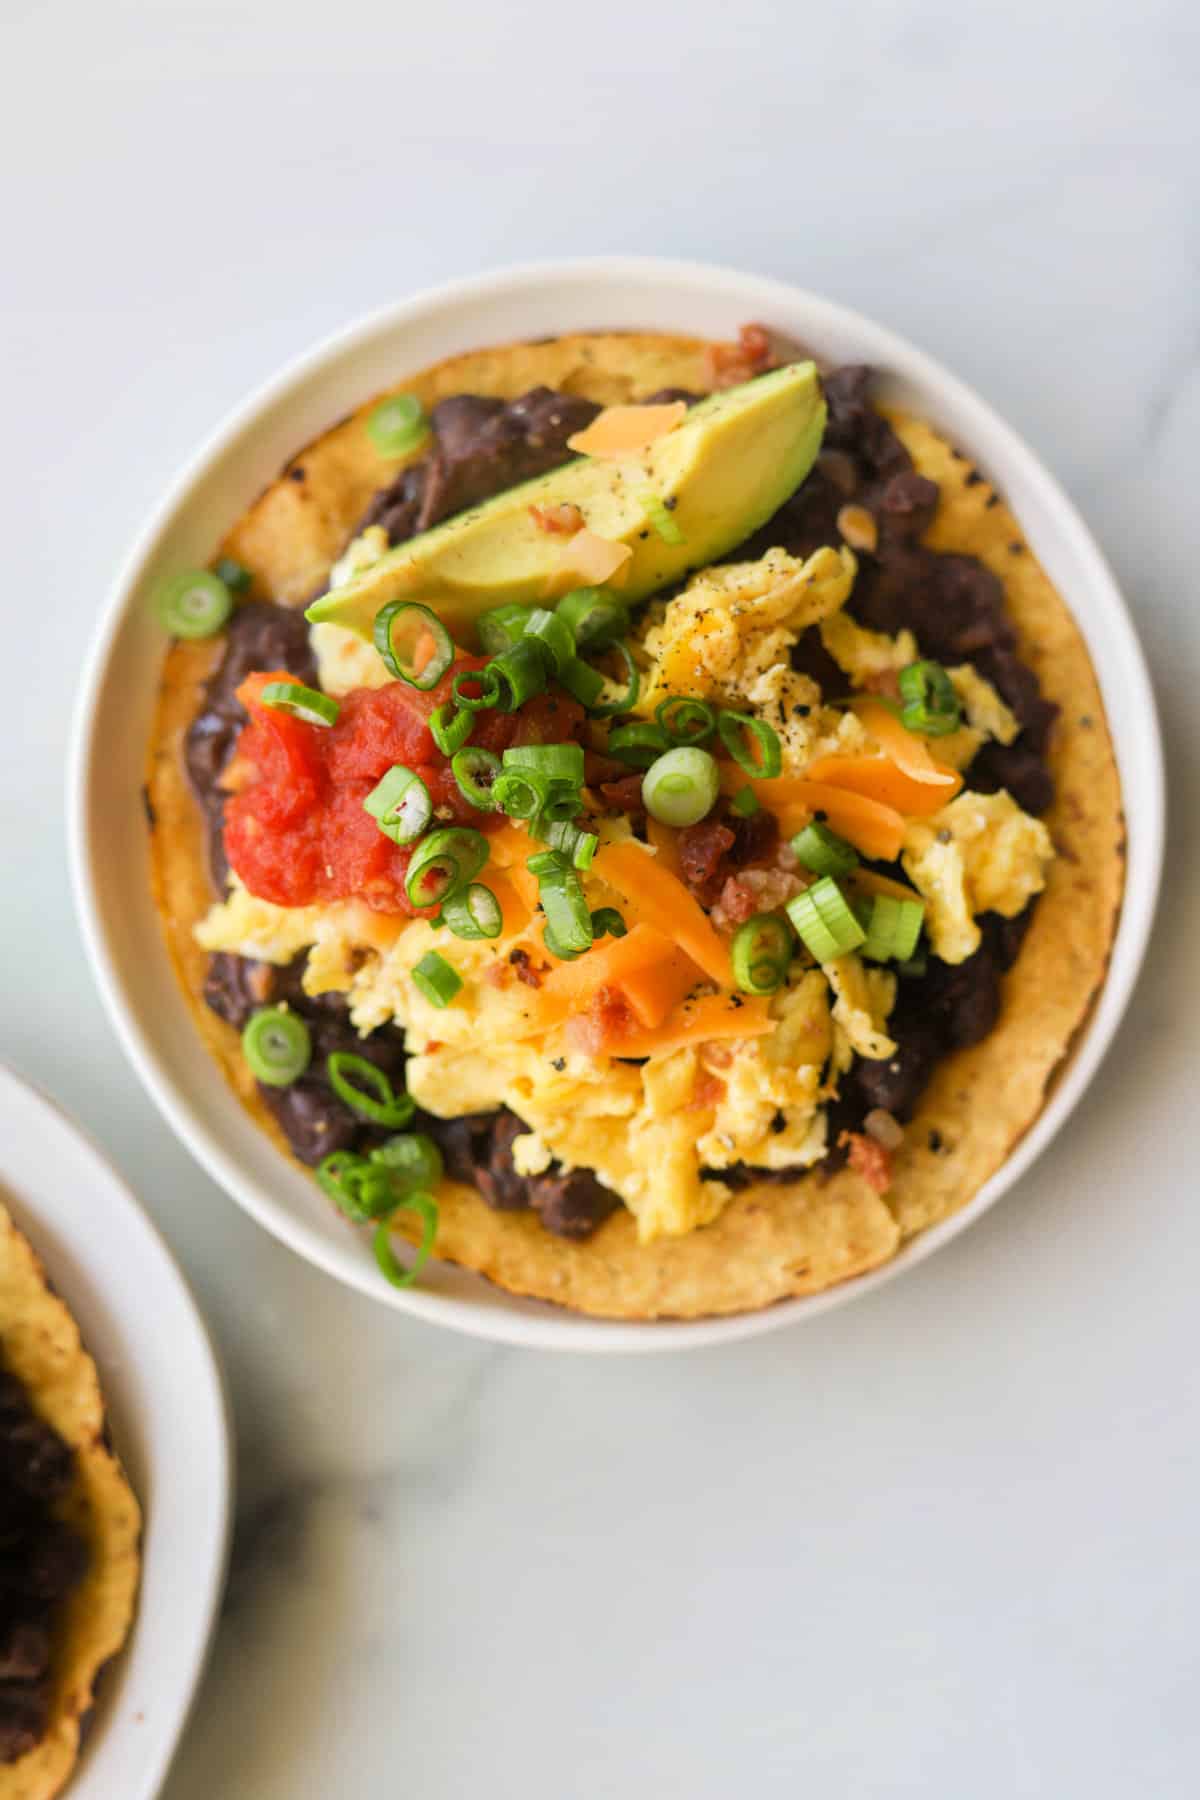 A close up overhead shot of a plate with a breakfast tostada on it.